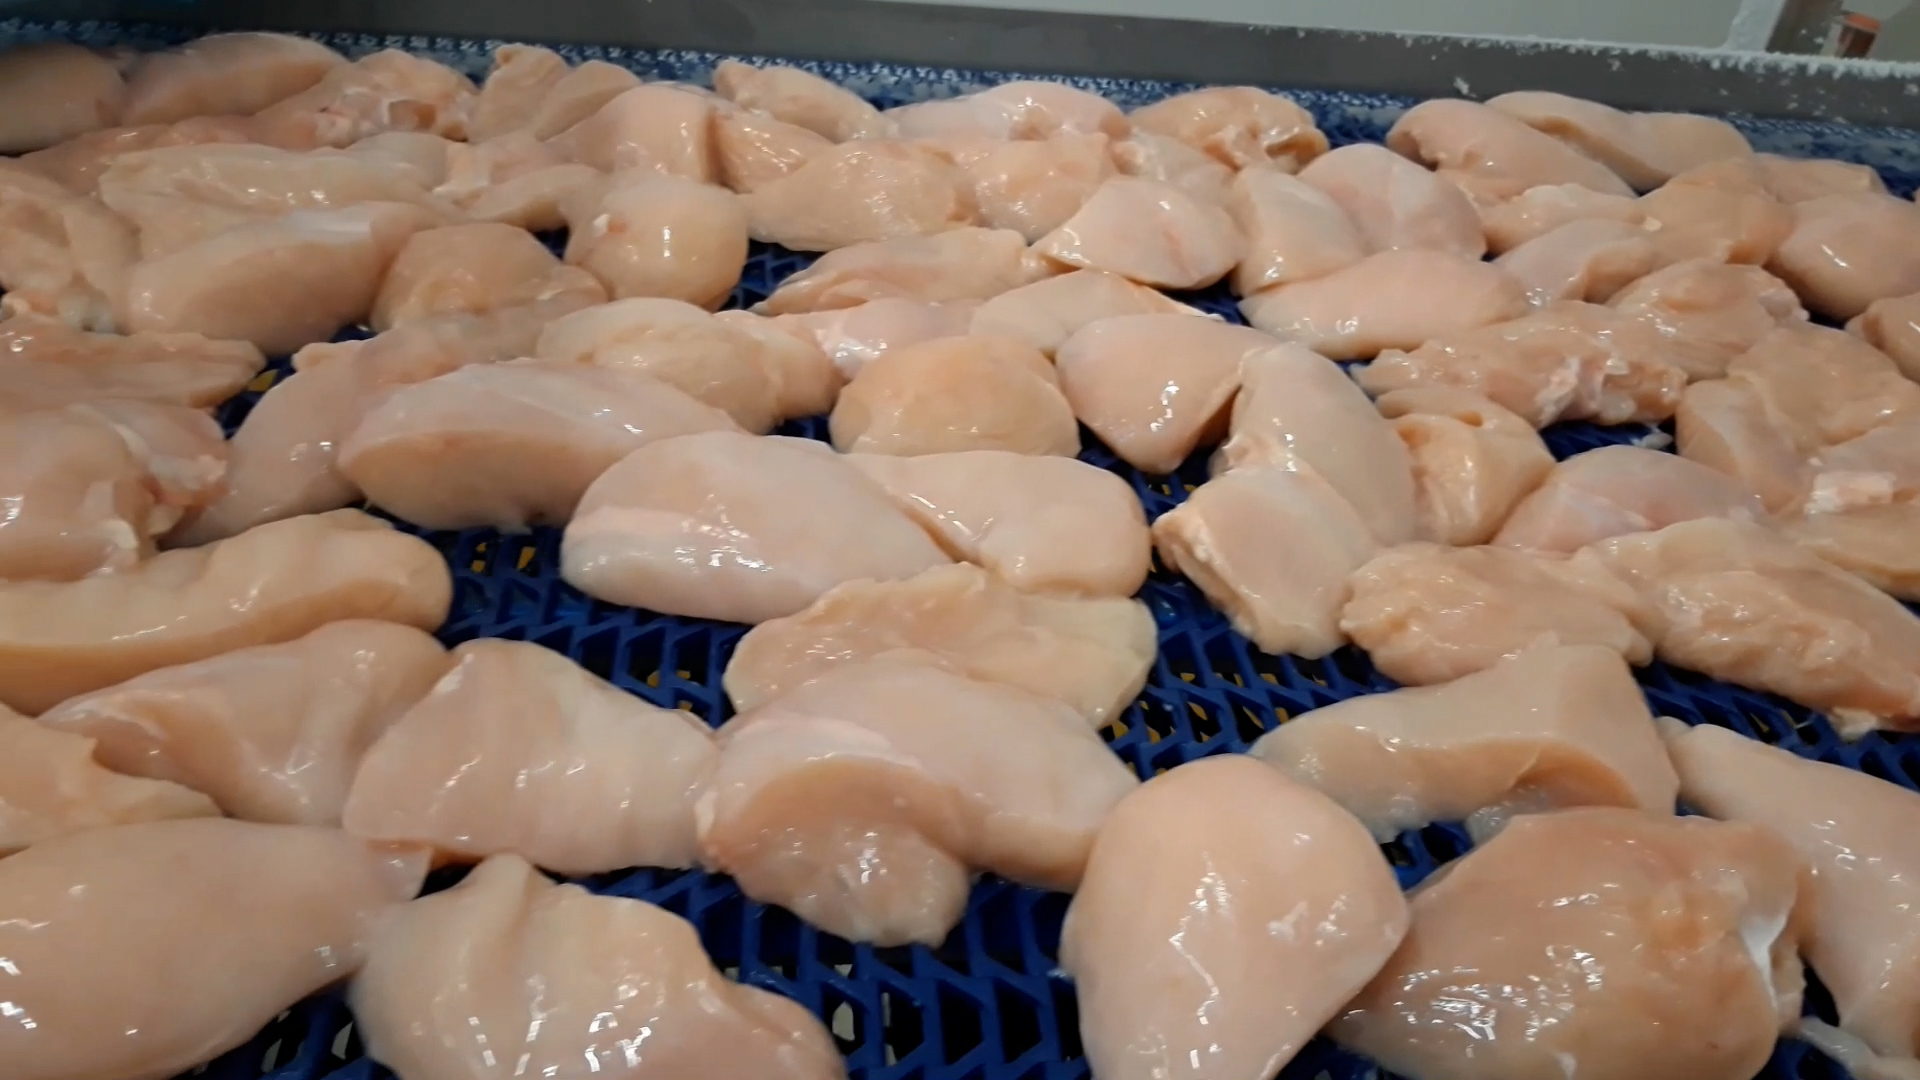 IQF freezing of chicken breasts